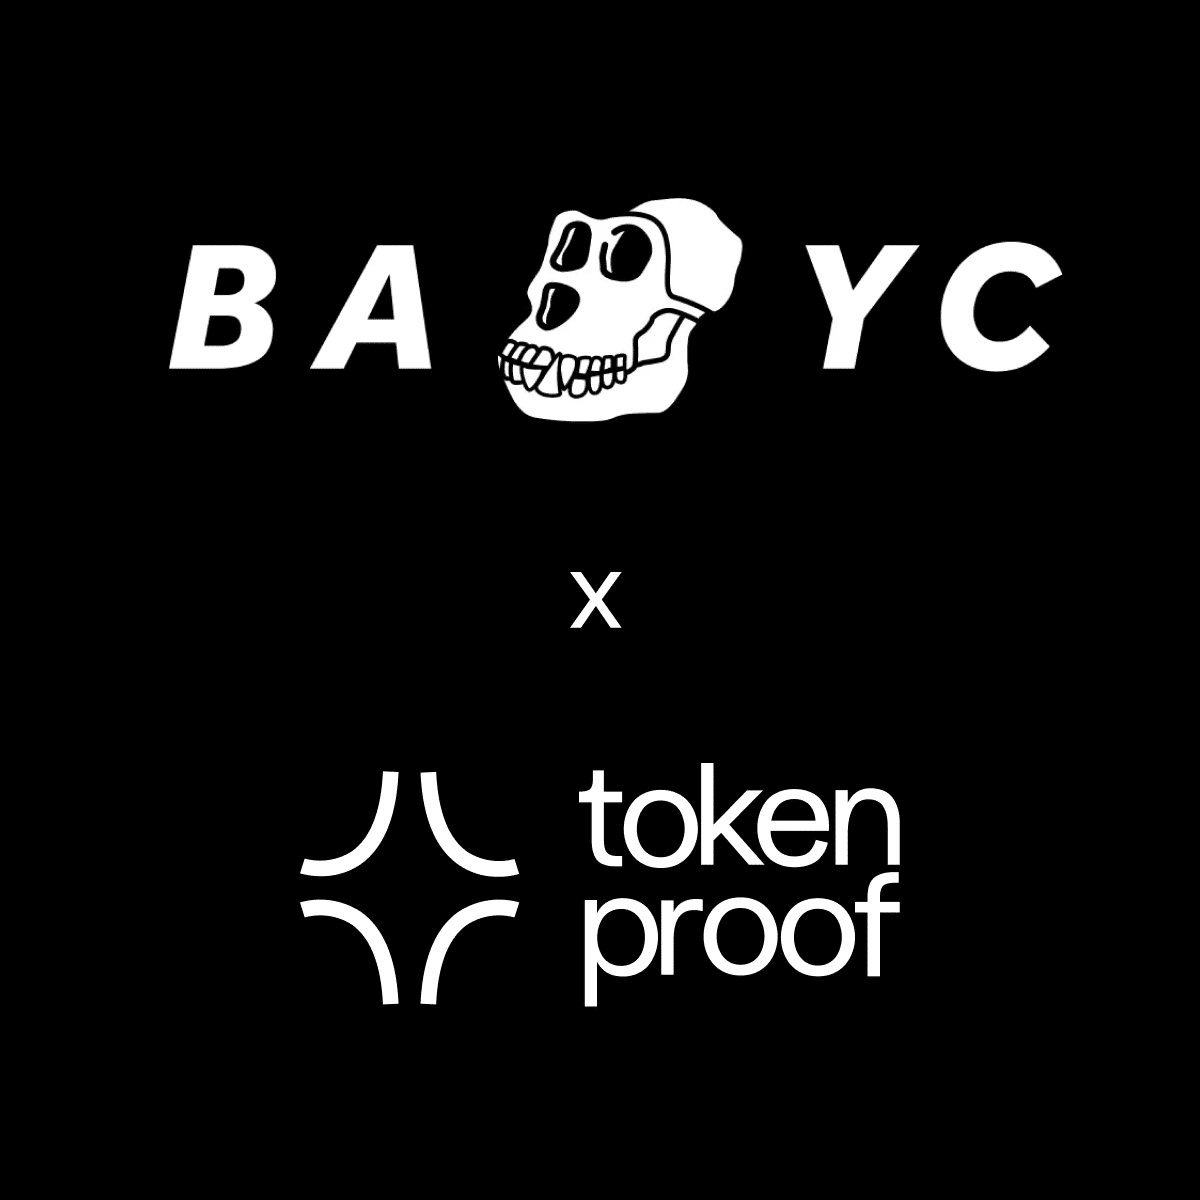 The image shows two logos, namely BAYC and Token Proof, a collaboration poster about ApeFest 2022